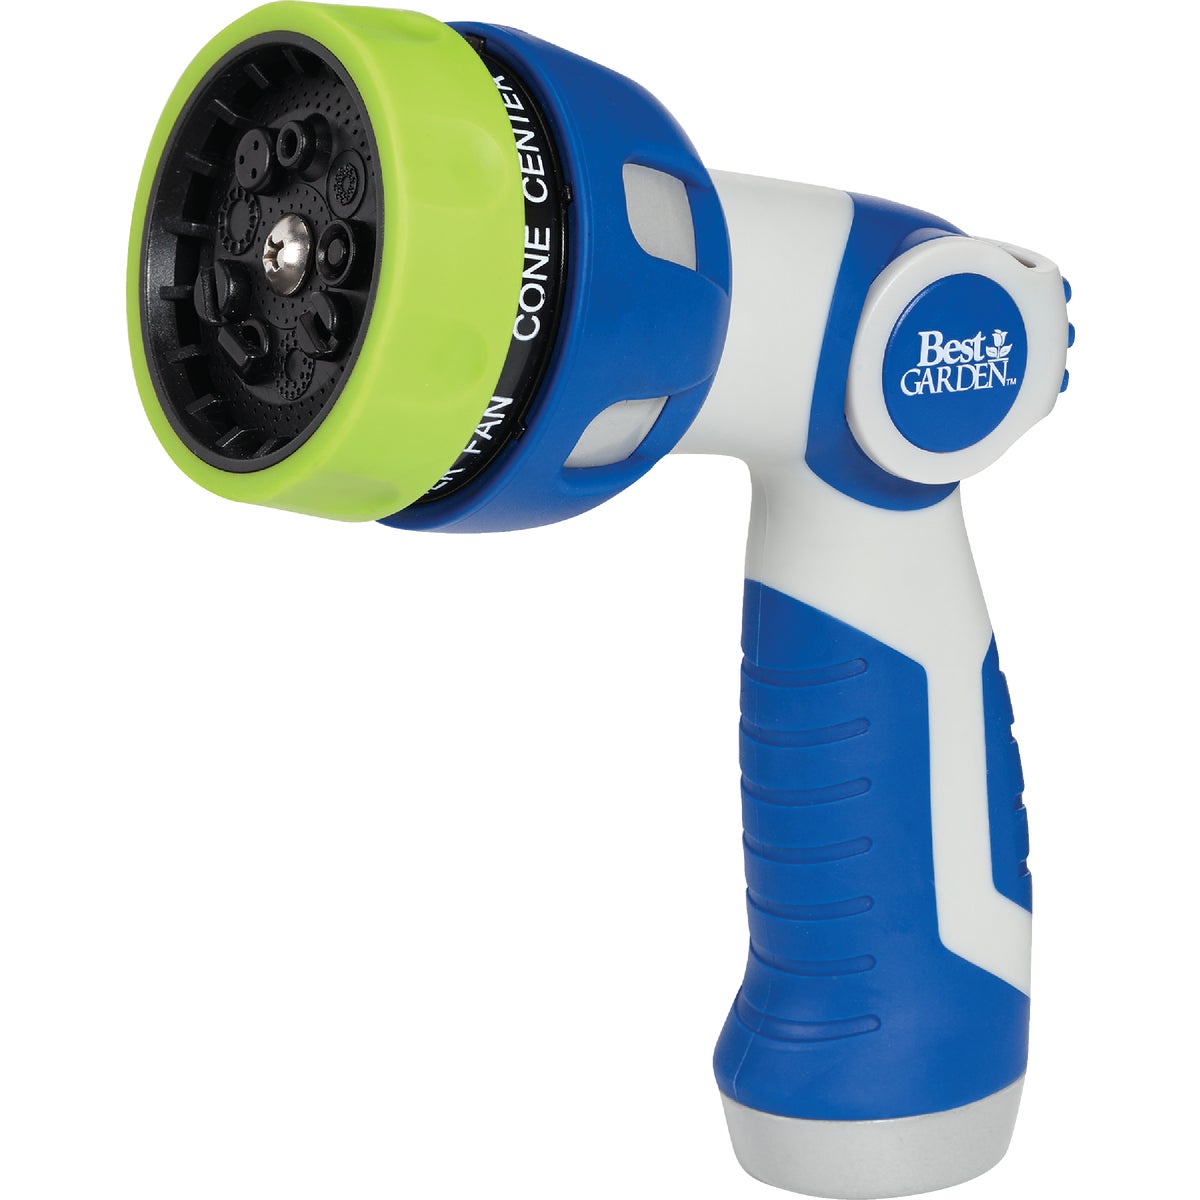 Item 700413, Multi-pattern nozzle featuring metal core with over mold for comfort grip.